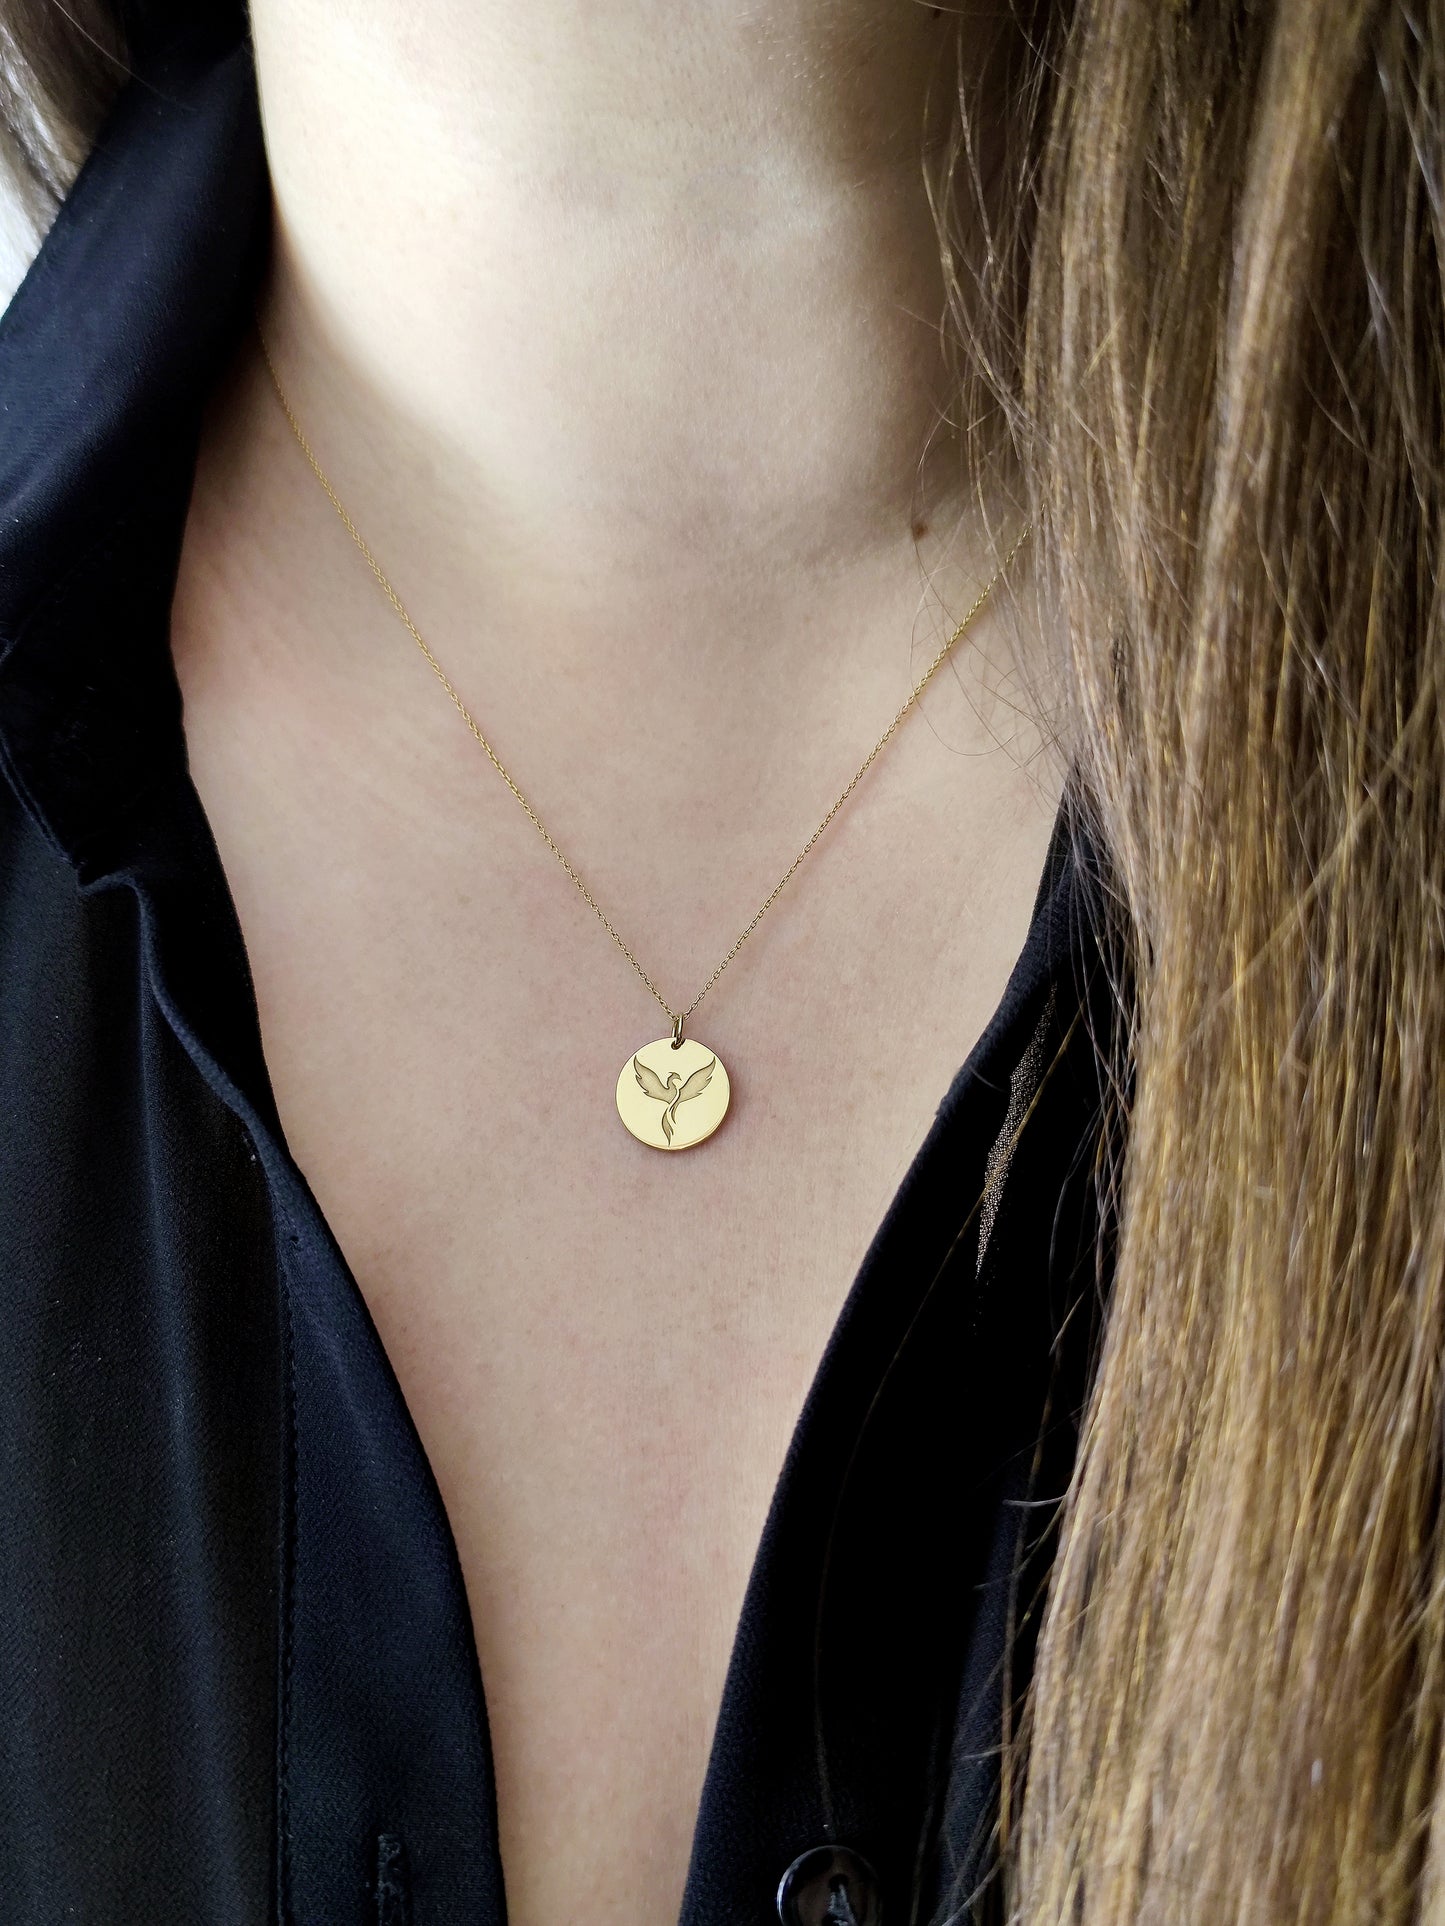 Close up of a woman's neck wearing a necklace with a disc pendant engraved with a phoenix firebird